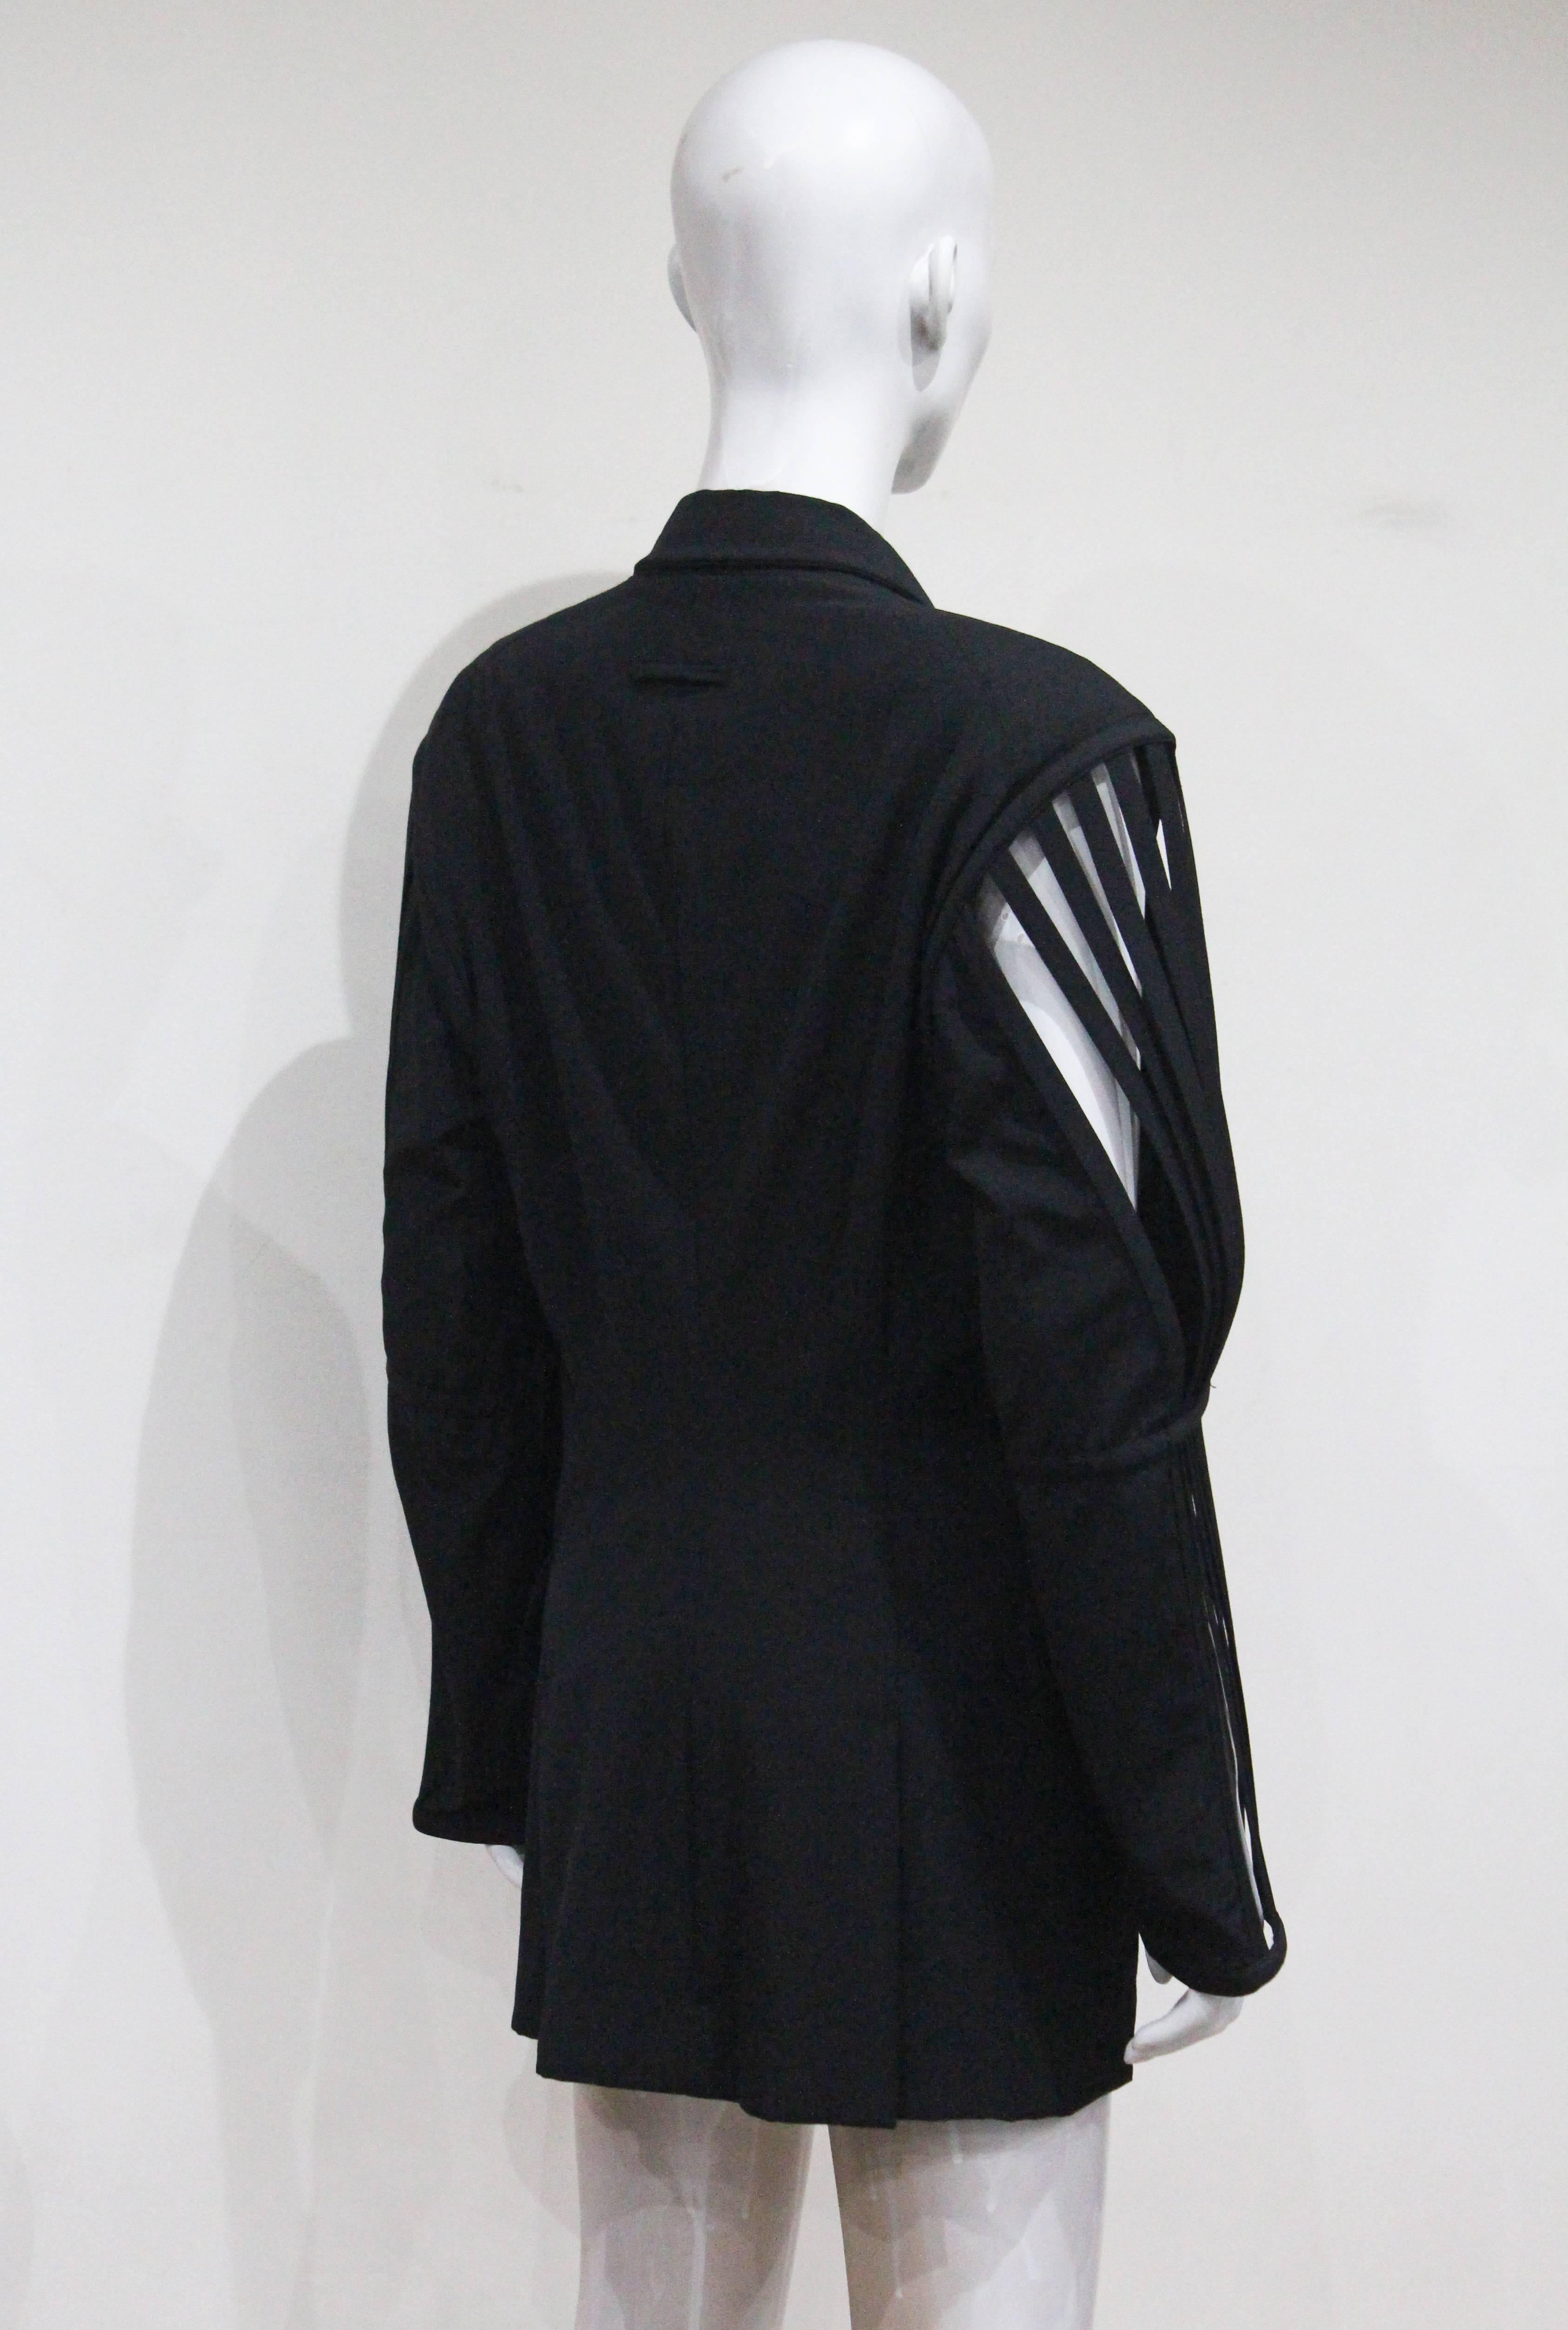 Women's or Men's Jean Paul Gaultier double breasted blazer jacket with caged sleeves, c. 1989